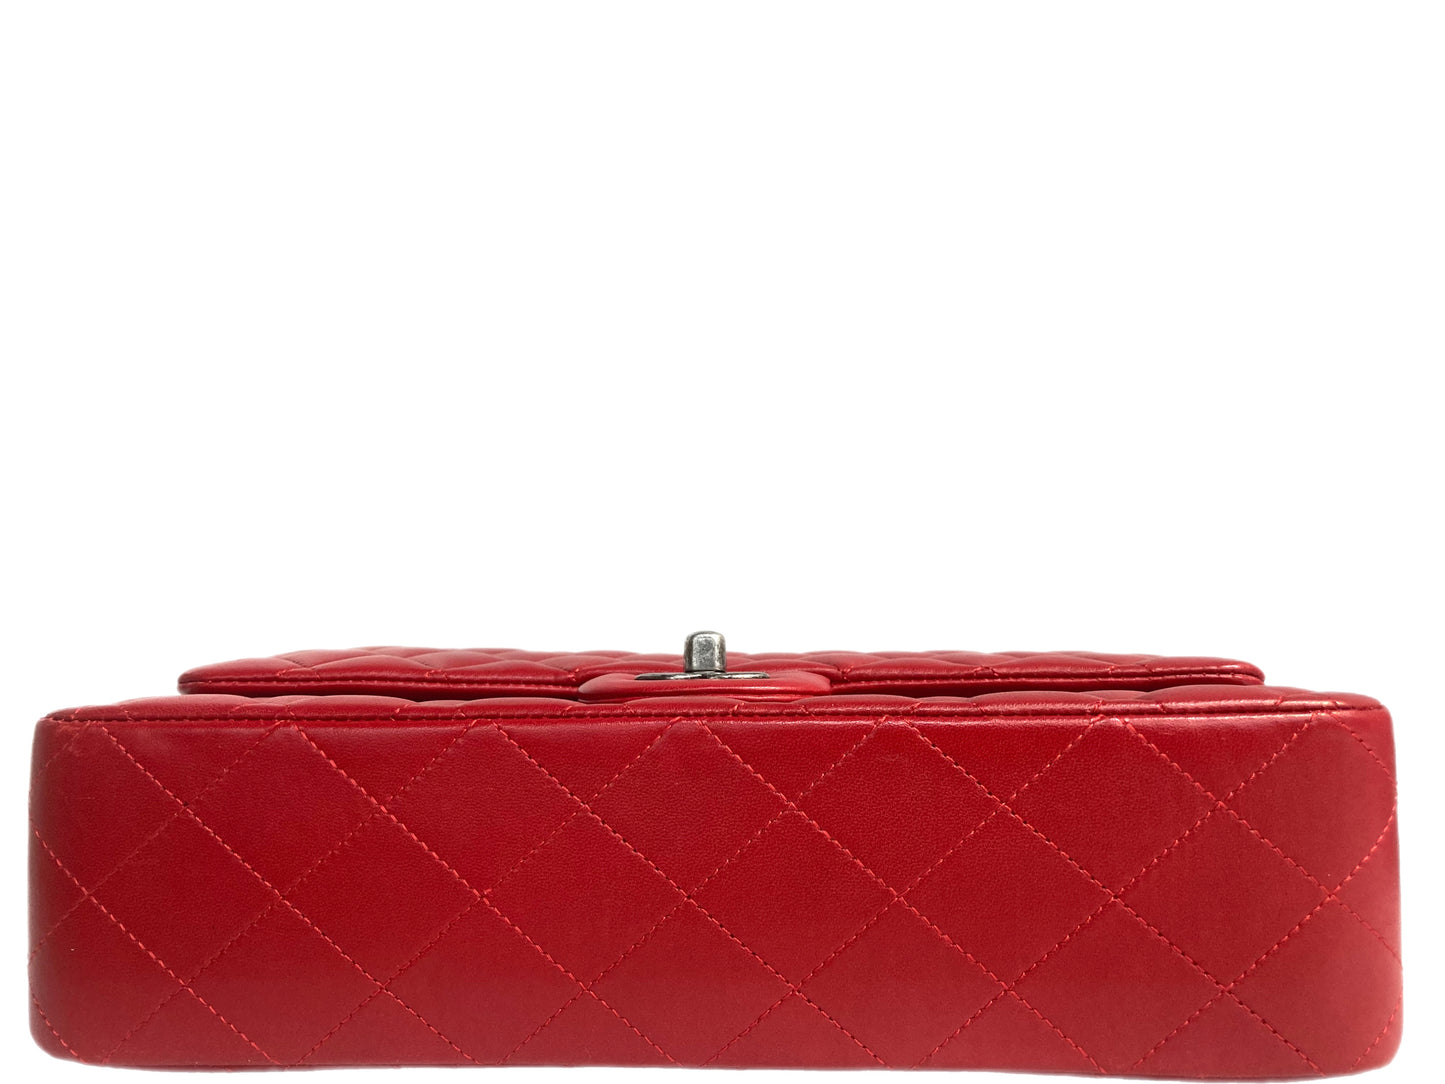 CHANEL Lambskin Leather Medium Double Flap Bag Red